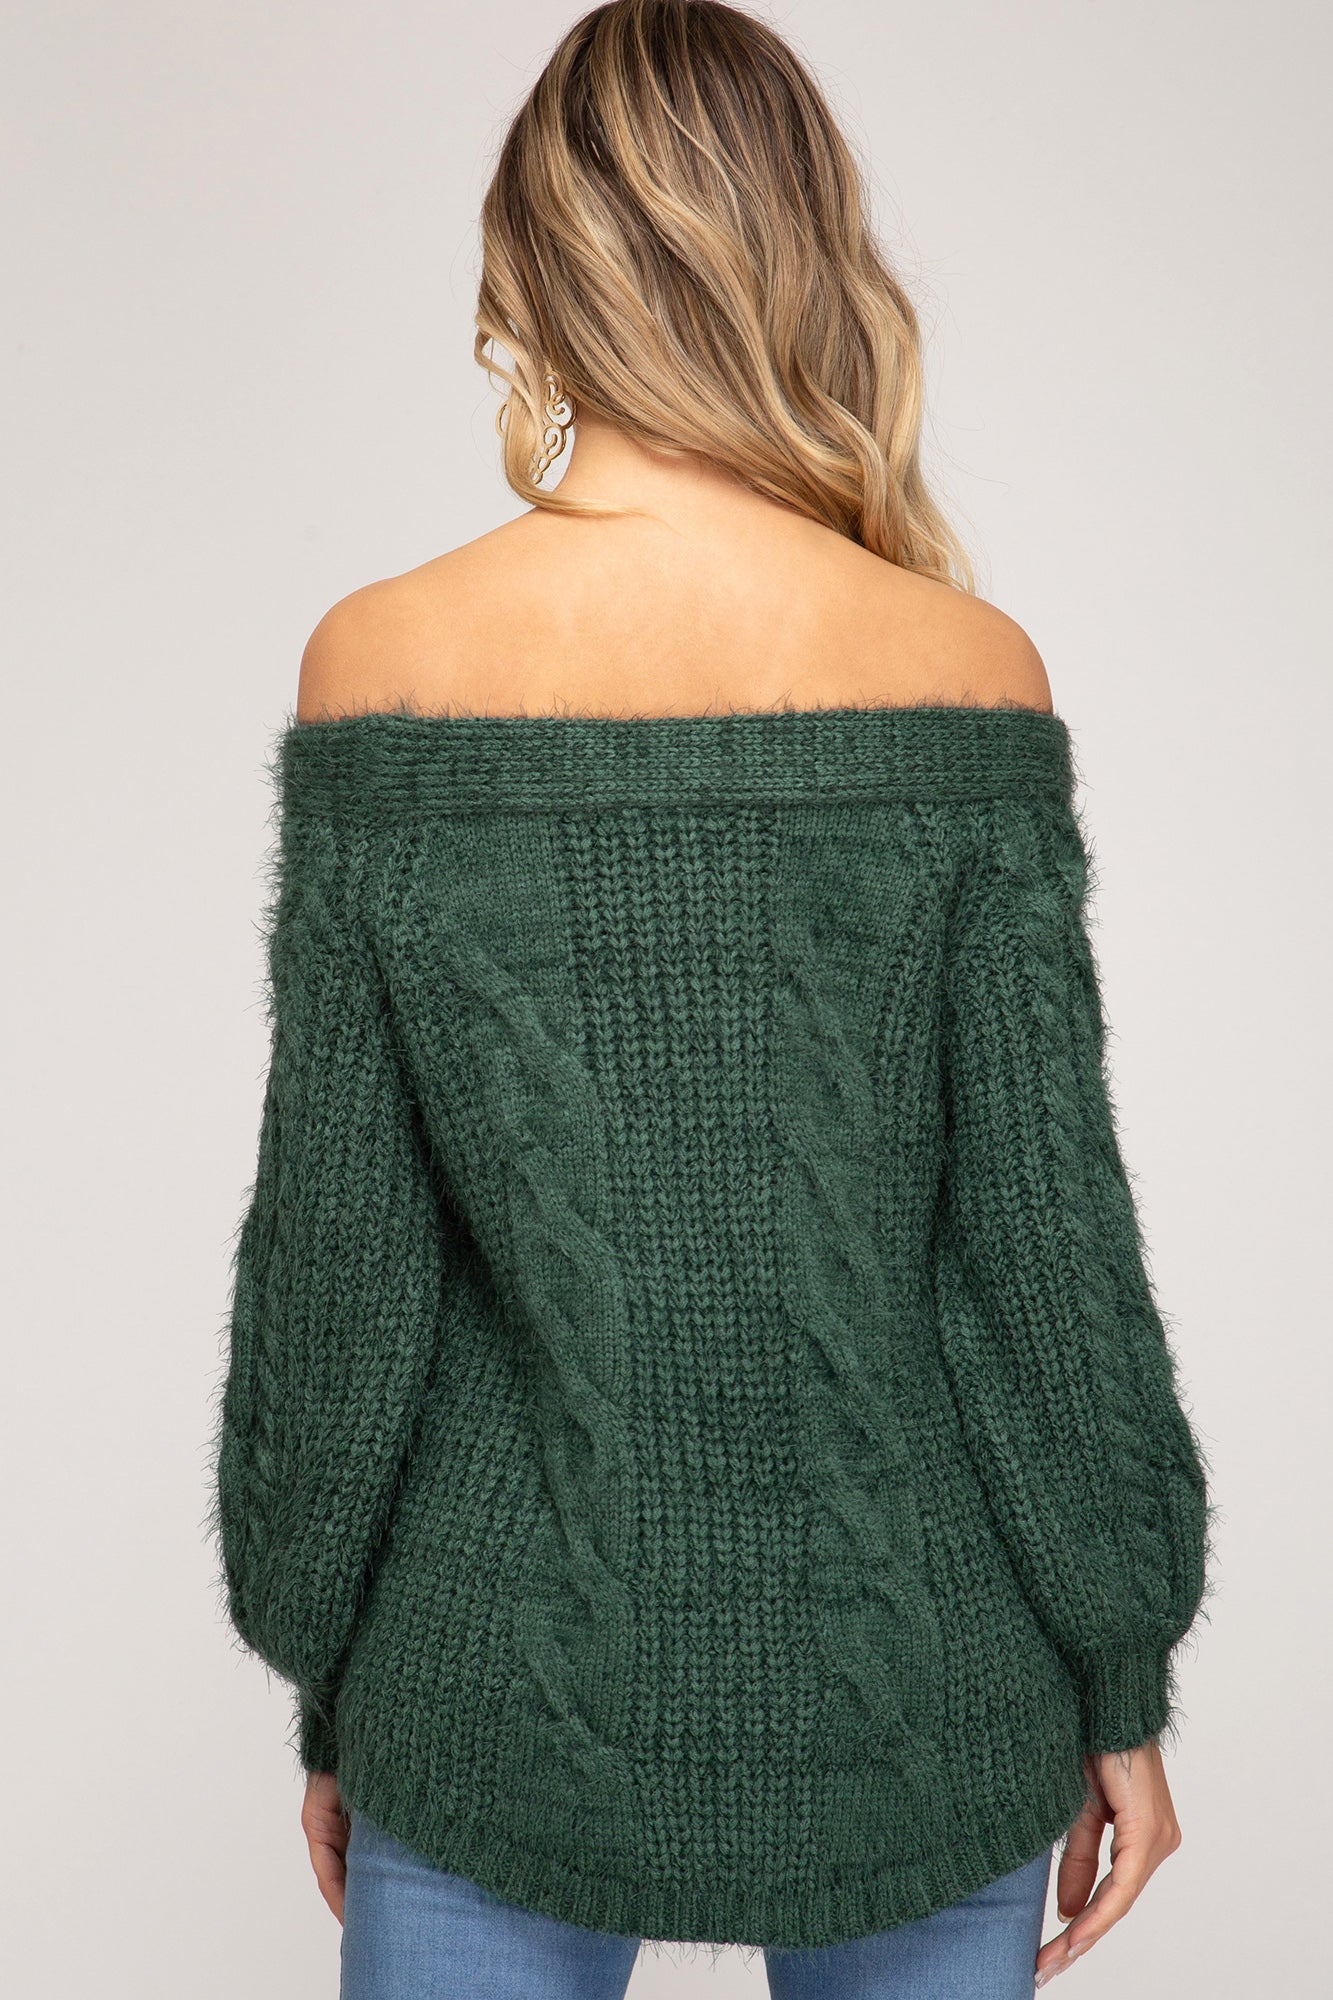 Off The Shoulder Sweater!